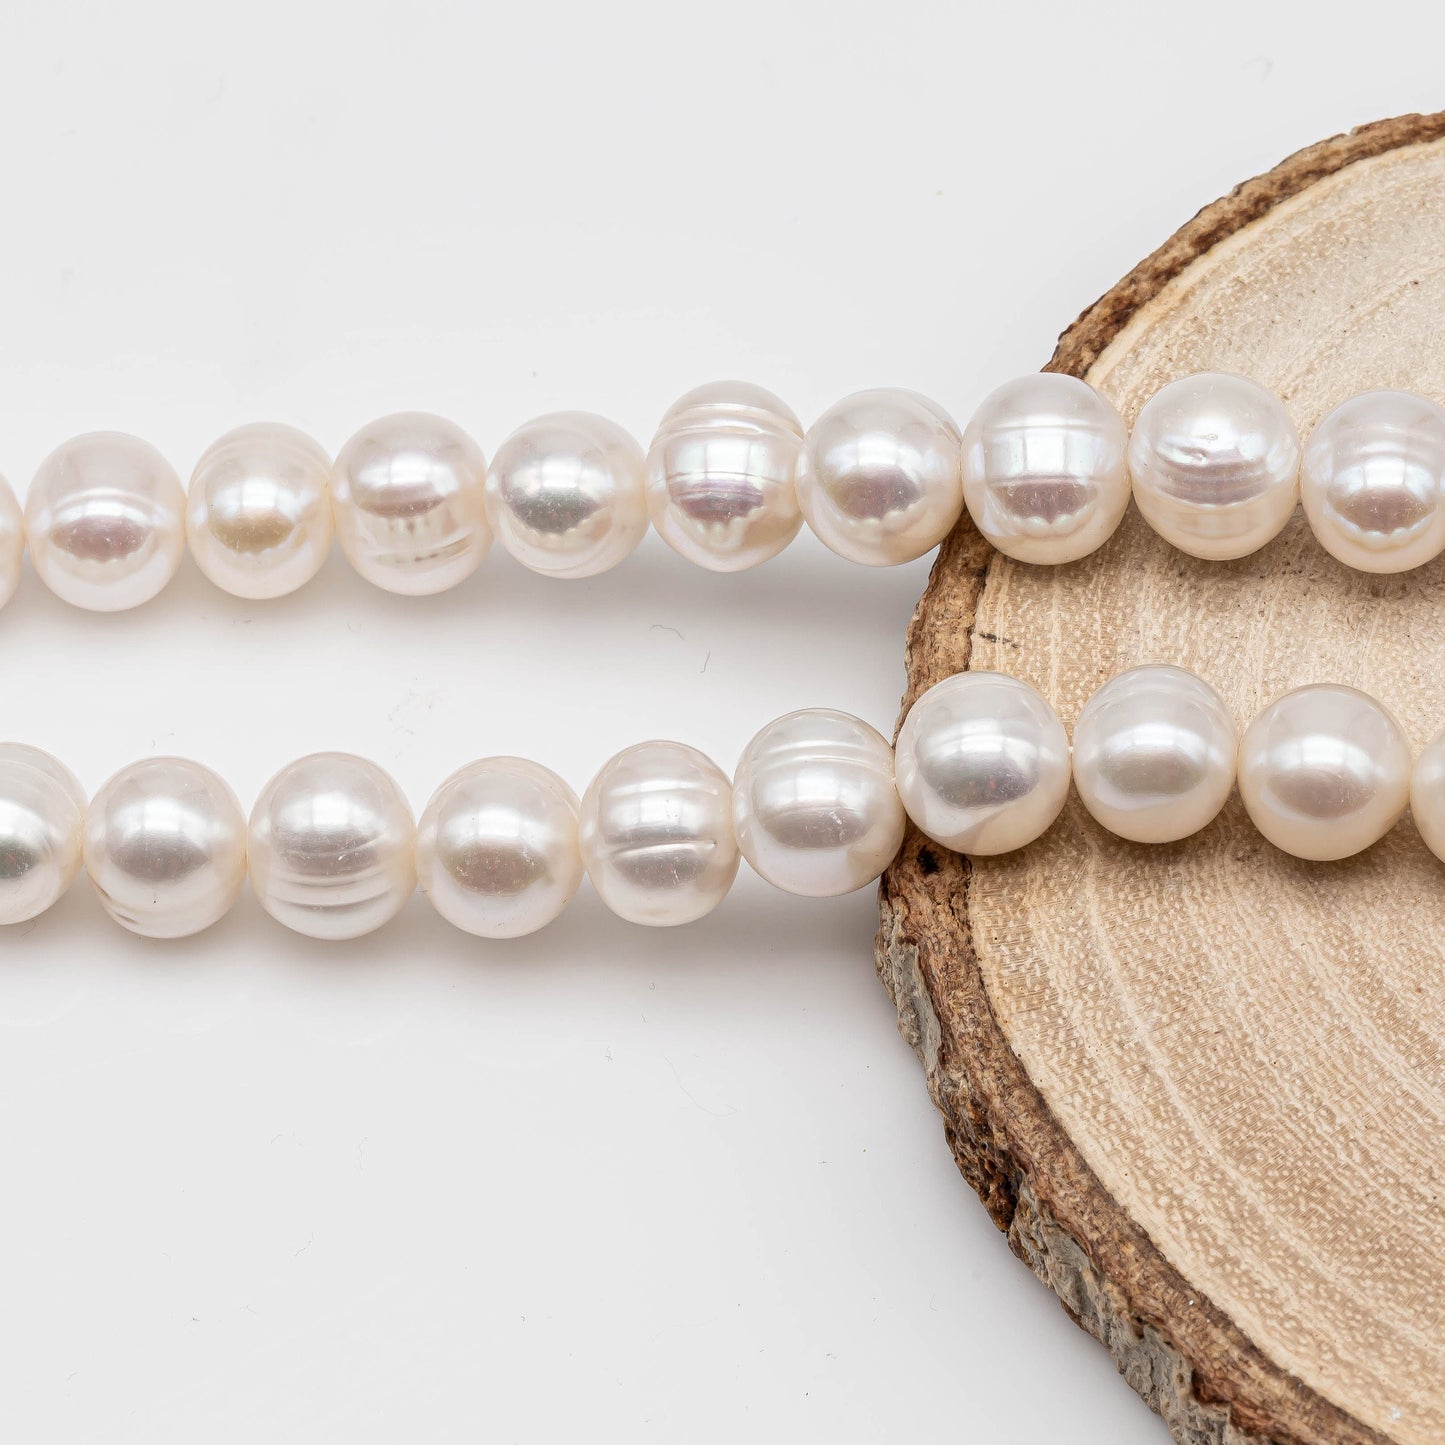 8-9mm Freshwater Pearls Potato or Near Round Pearl Beads with Nice Luster for Jewelry Making, Full Strand, SKU # 1135FW